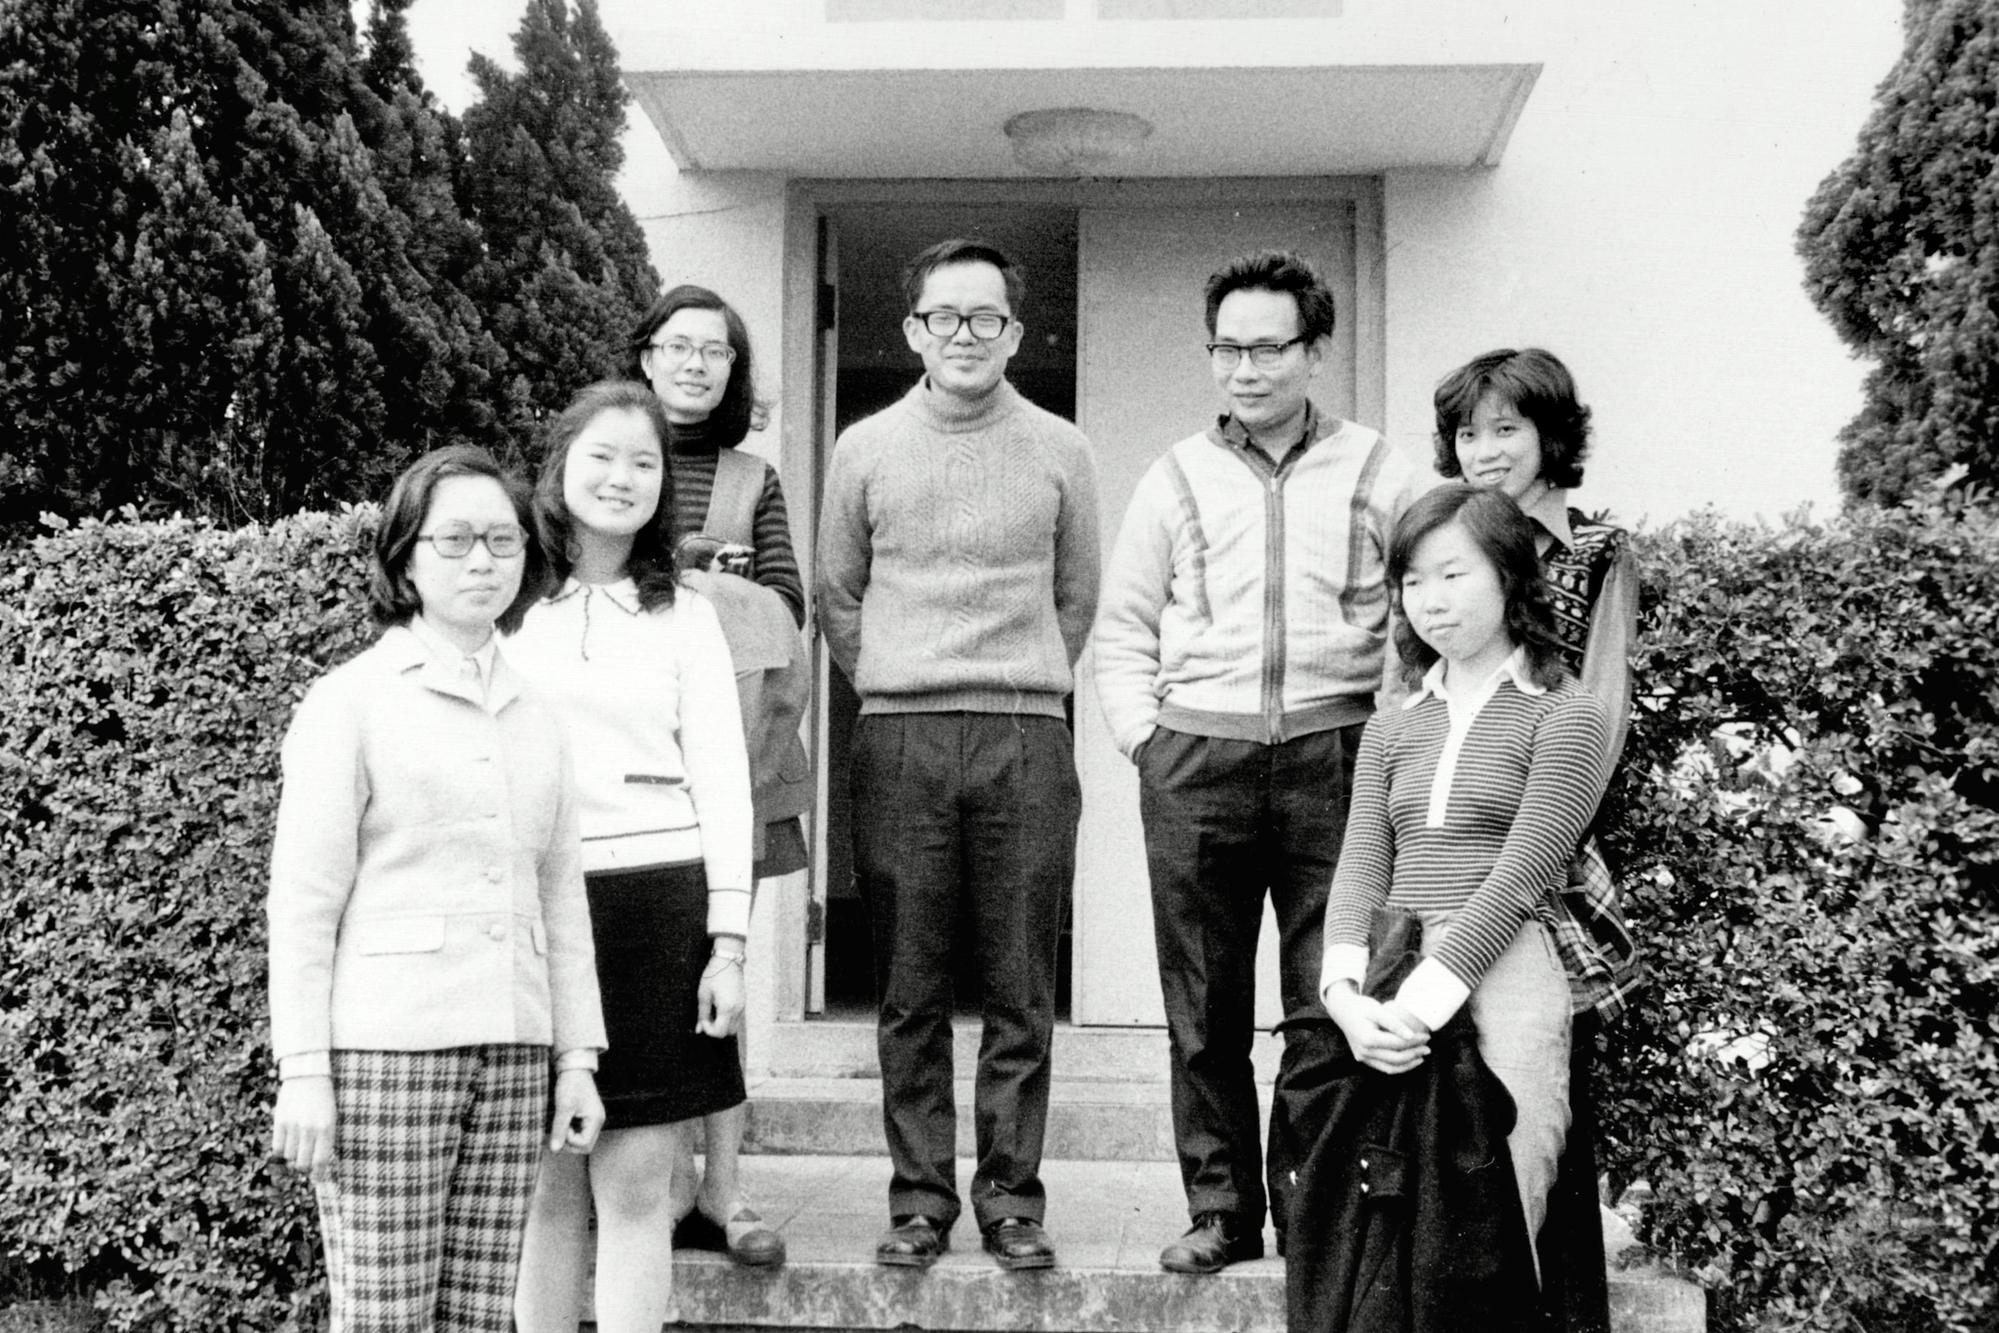 Professor Yi-Yan Li (李怡嚴) (3rd right) and Professor Yin-Zun Yang (楊銀圳) (4th right) taking a photo with students from the Physics Department Class of '74.